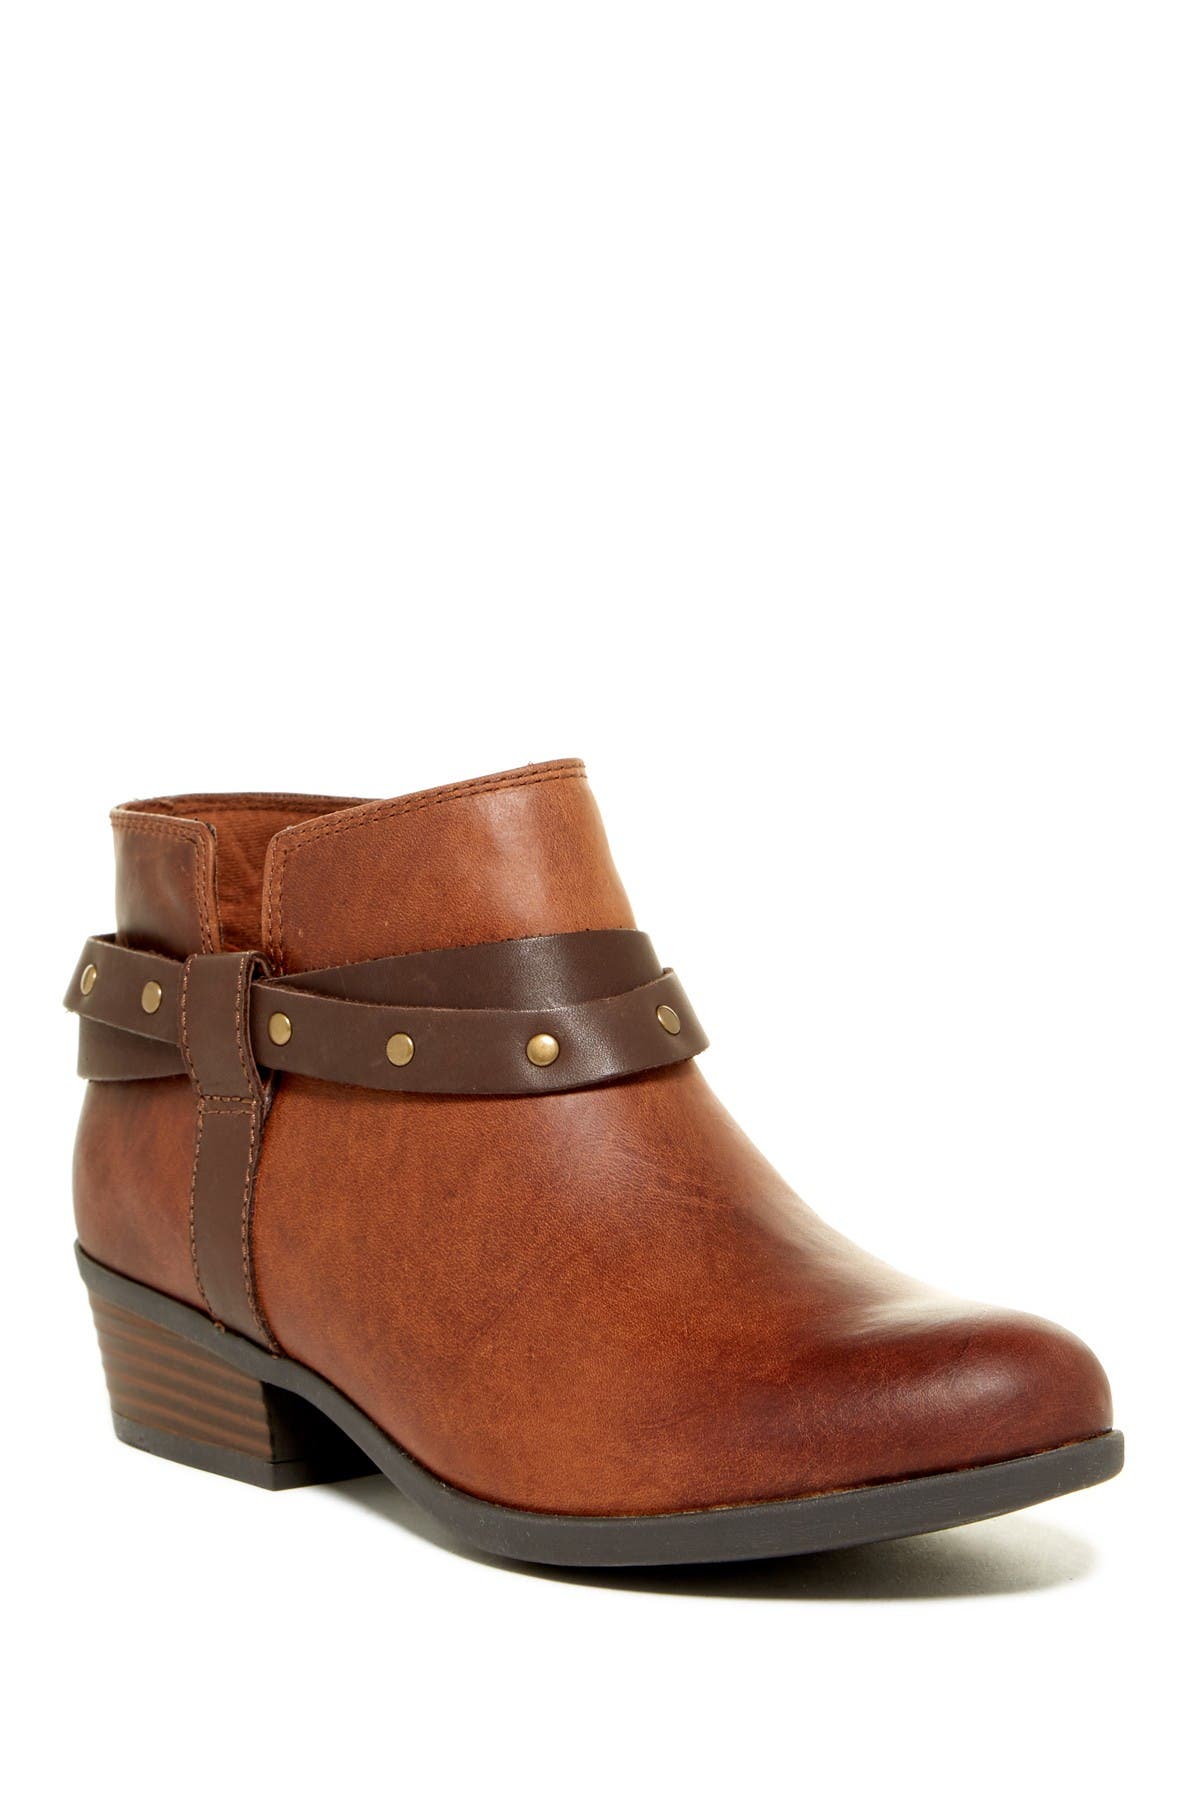 Clarks | Addiy Zoie Leather Ankle Boot 